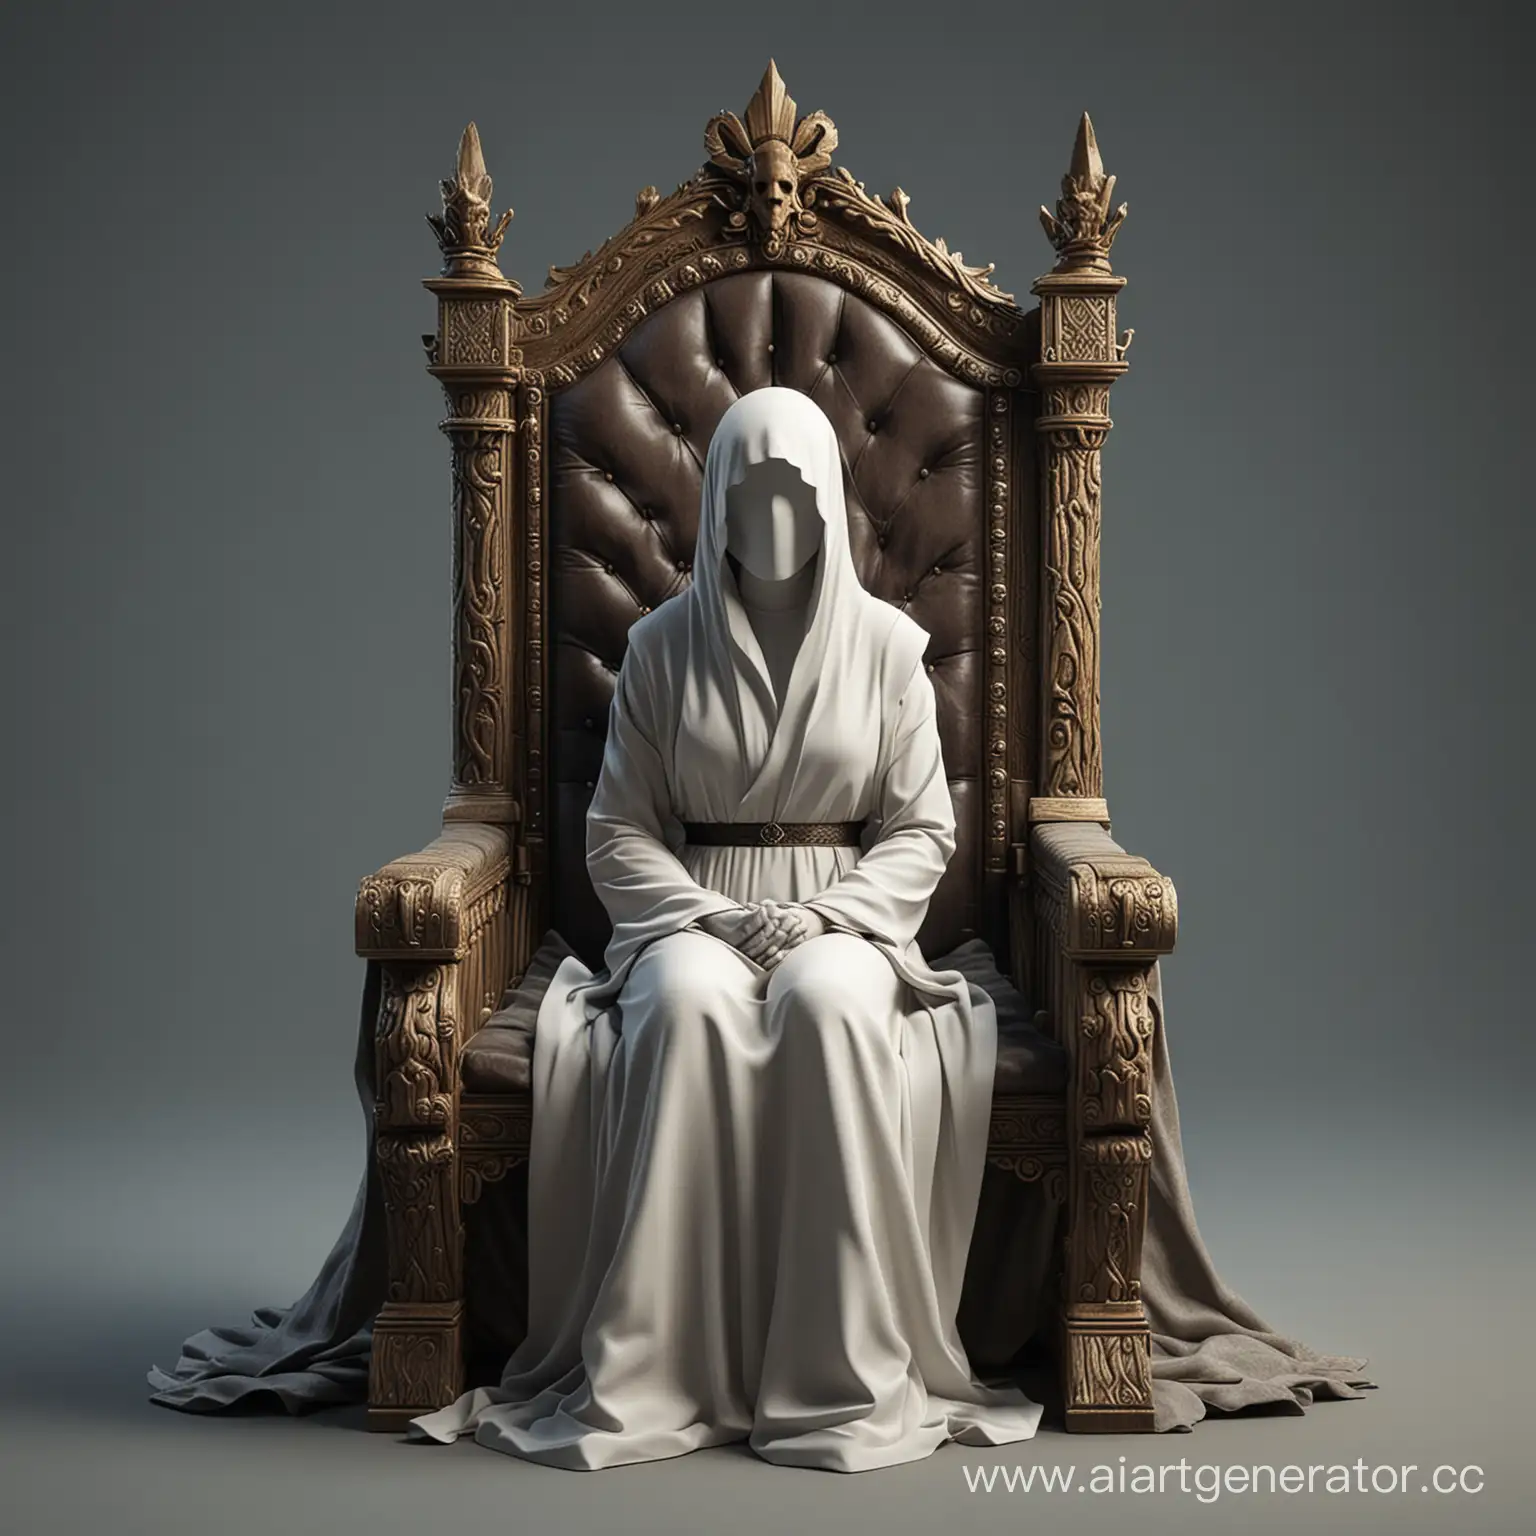 Faceless-Figure-Seated-on-Ornate-3D-Throne